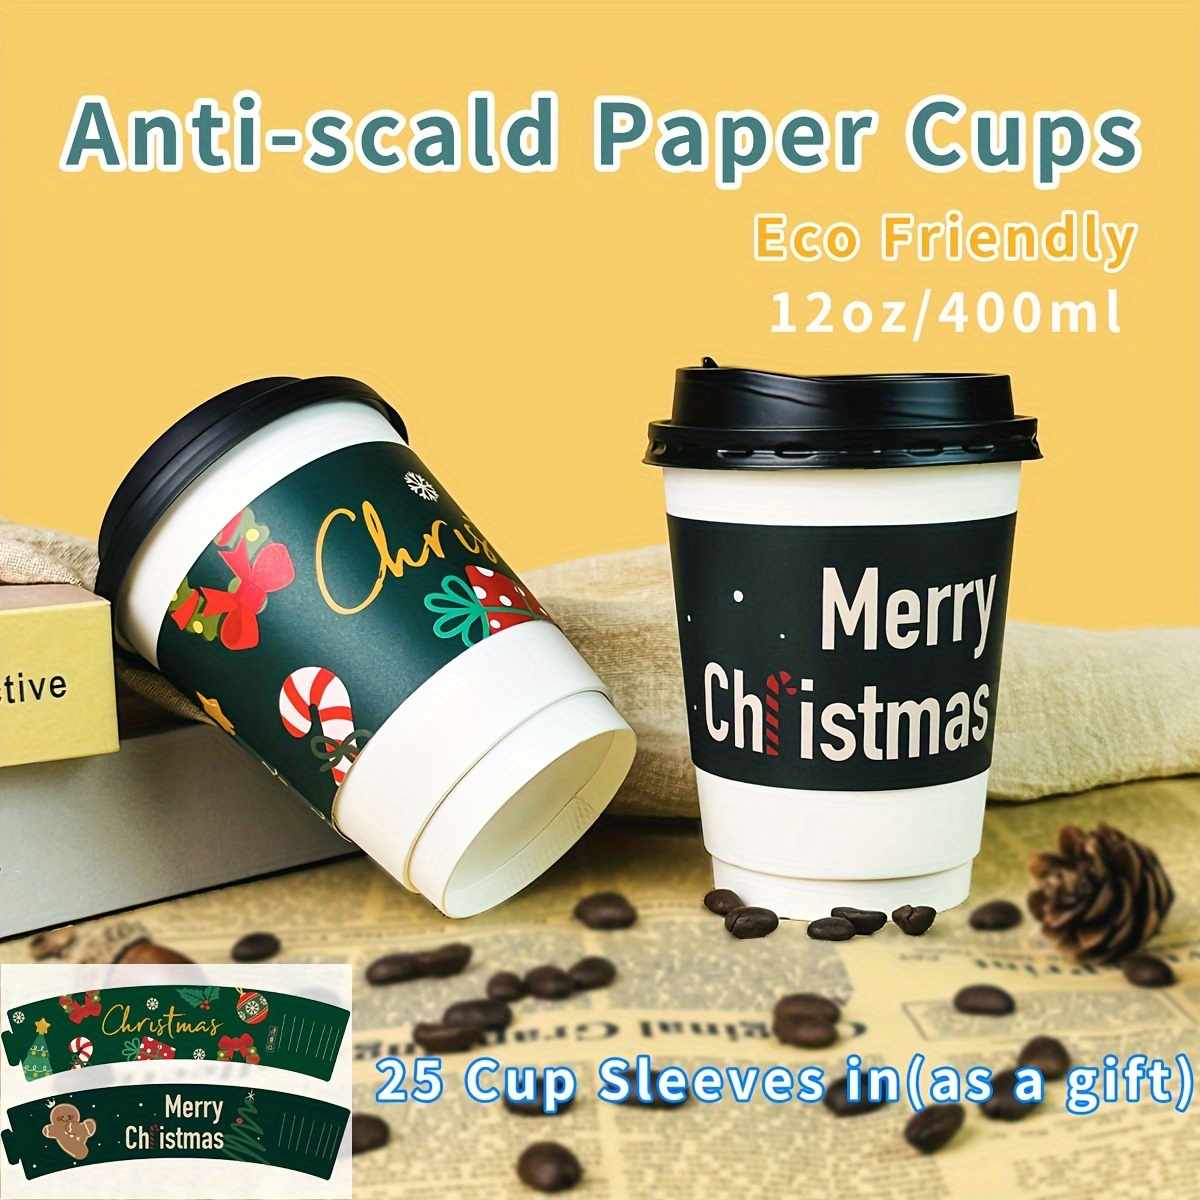 Happy Holidays Frosted Plastic Cups, Christmas Holiday Cups, Holiday Party Plastic  Cup for Beer, Christmas Party Favors, Christmas Cup 125 